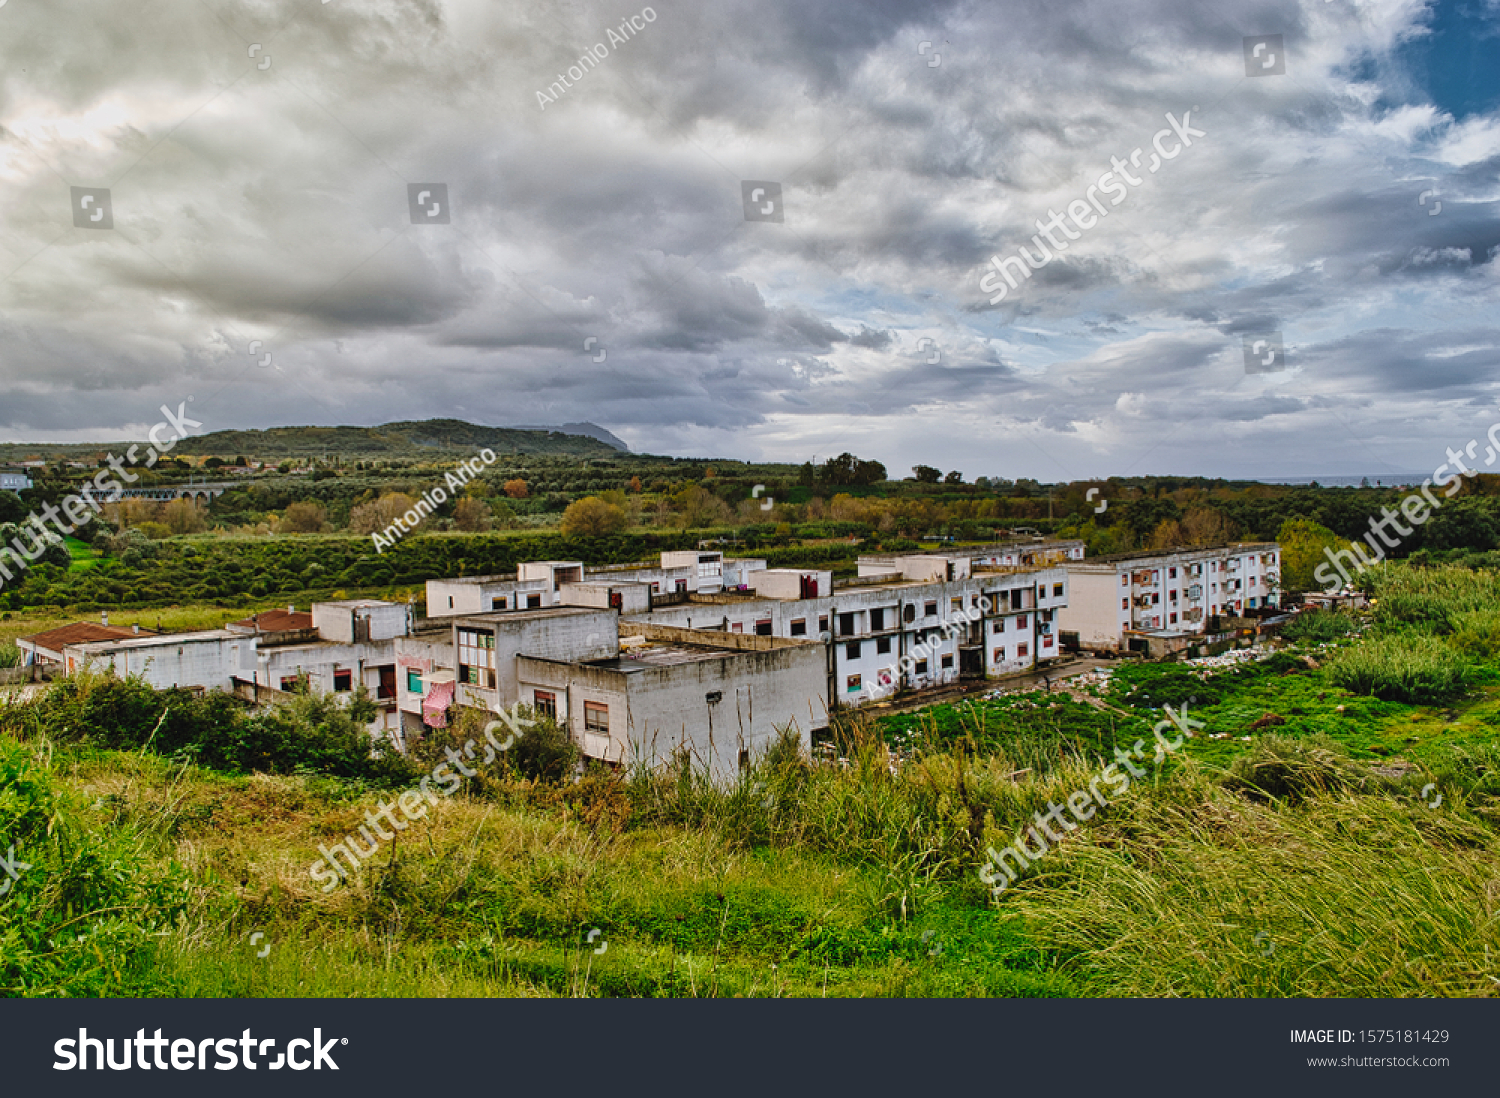 The Ciambra district of Gioia tauro, inhabited by gypsy families, is one of the most degraded places in Italy. #1575181429